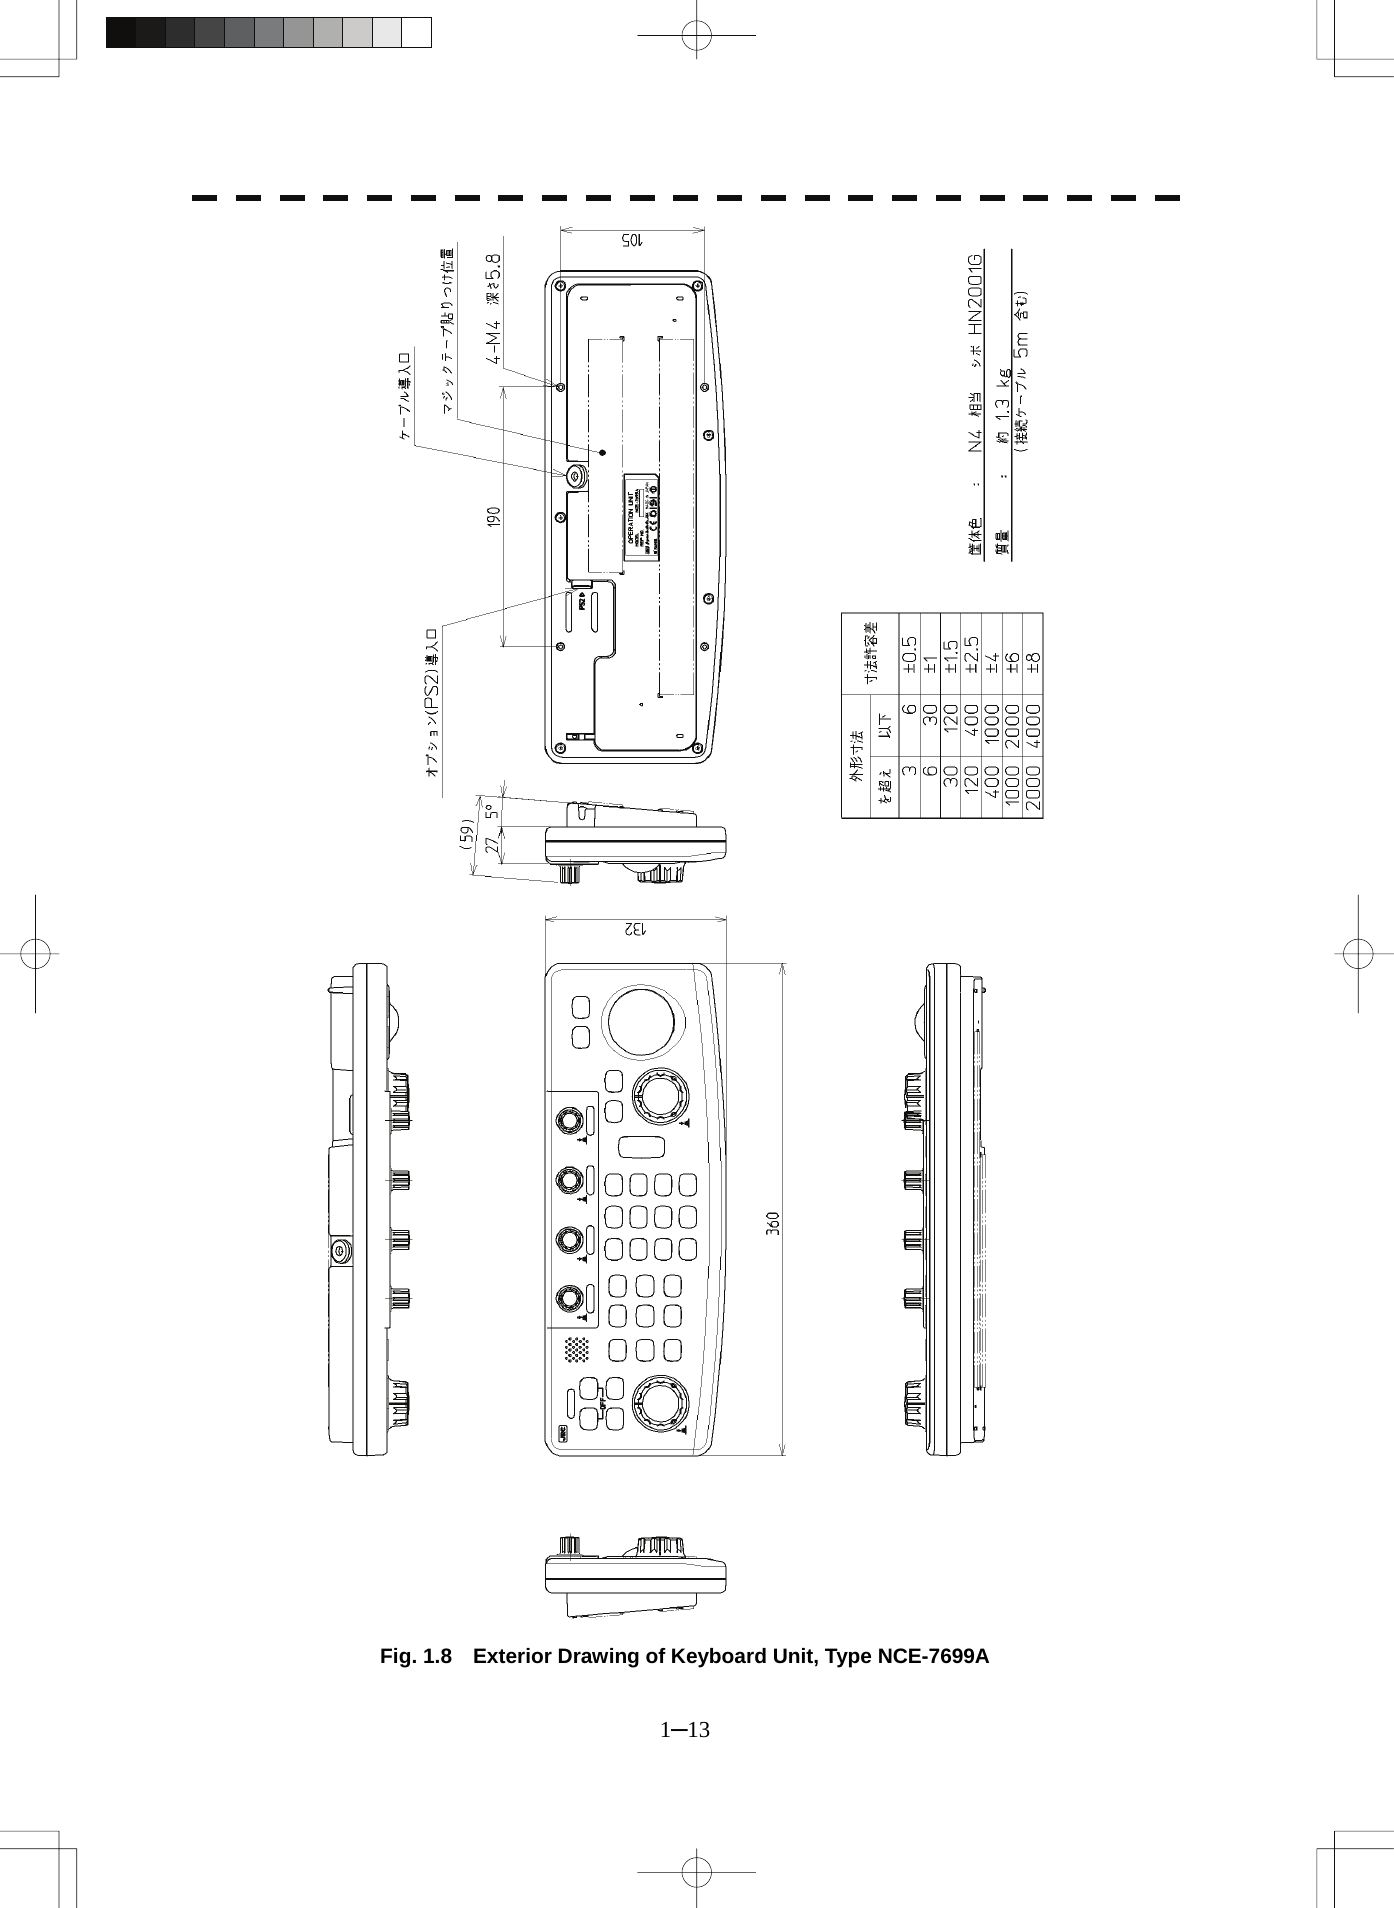  1─13   Fig. 1.8    Exterior Drawing of Keyboard Unit, Type NCE-7699A 